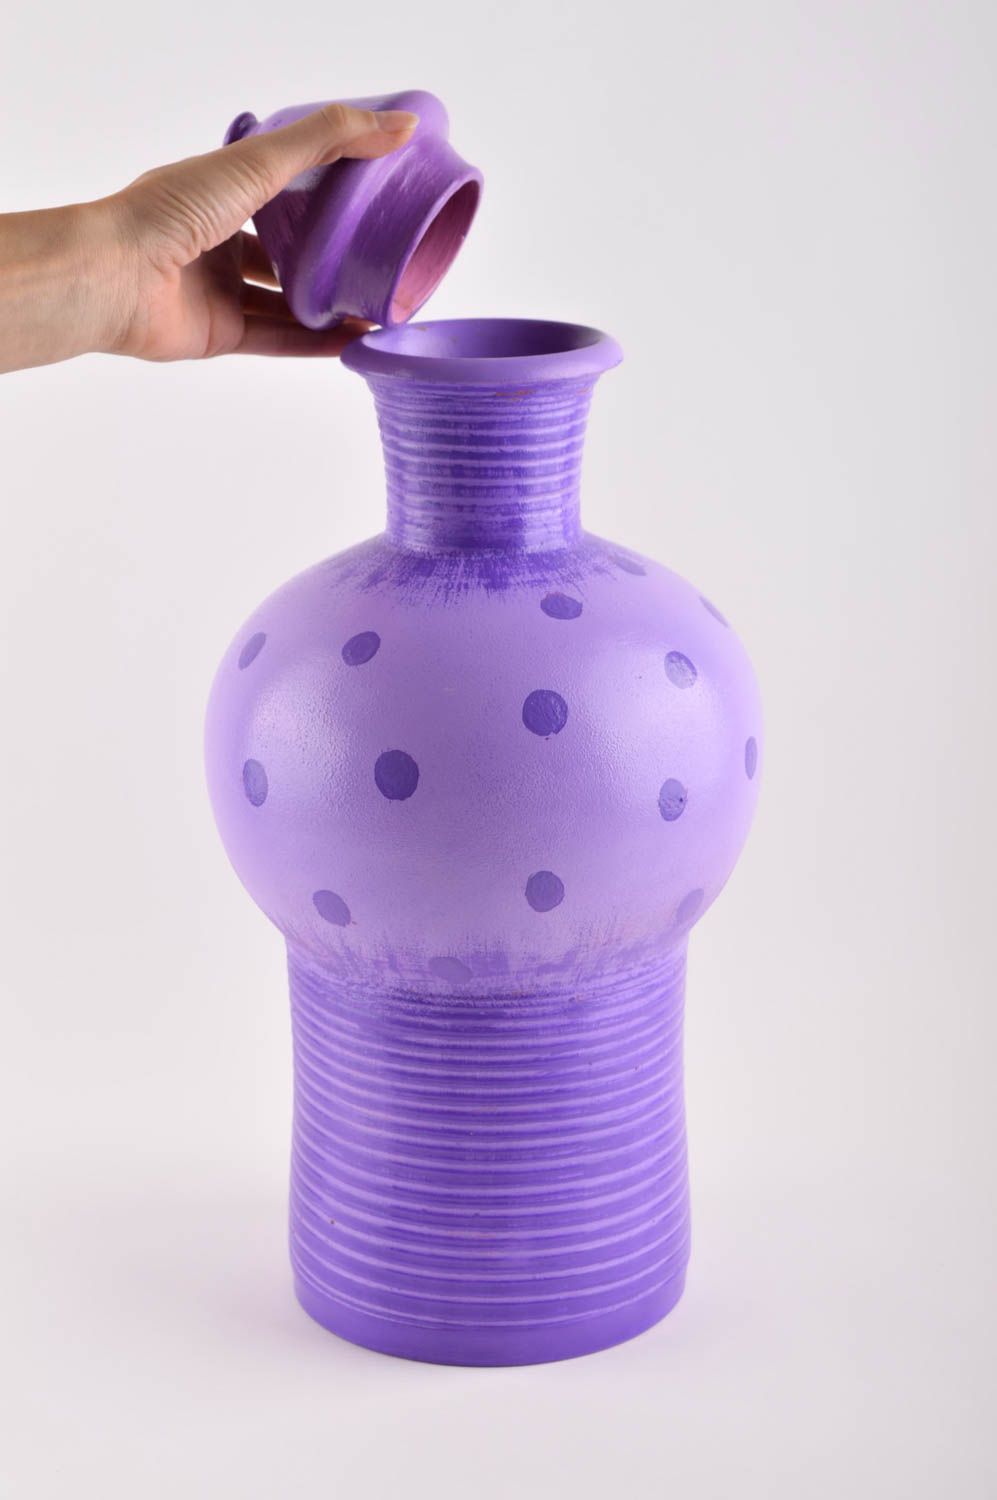 Floor vase 20 inches tall in purple color vase décor 7 lb photo 4